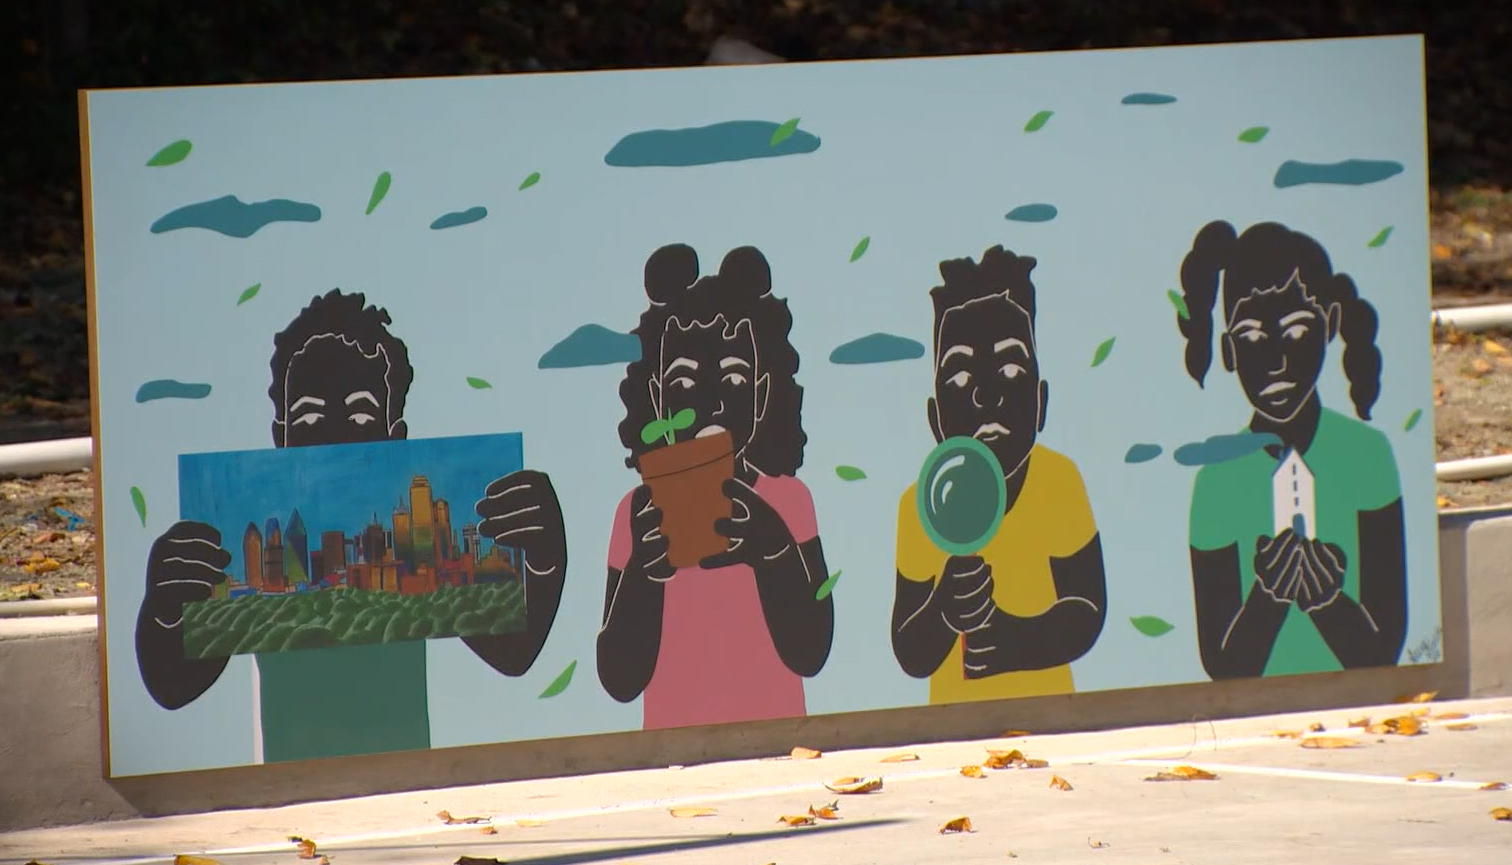 New mural and public park uplifting for neighbors near South Oak Cliff High School